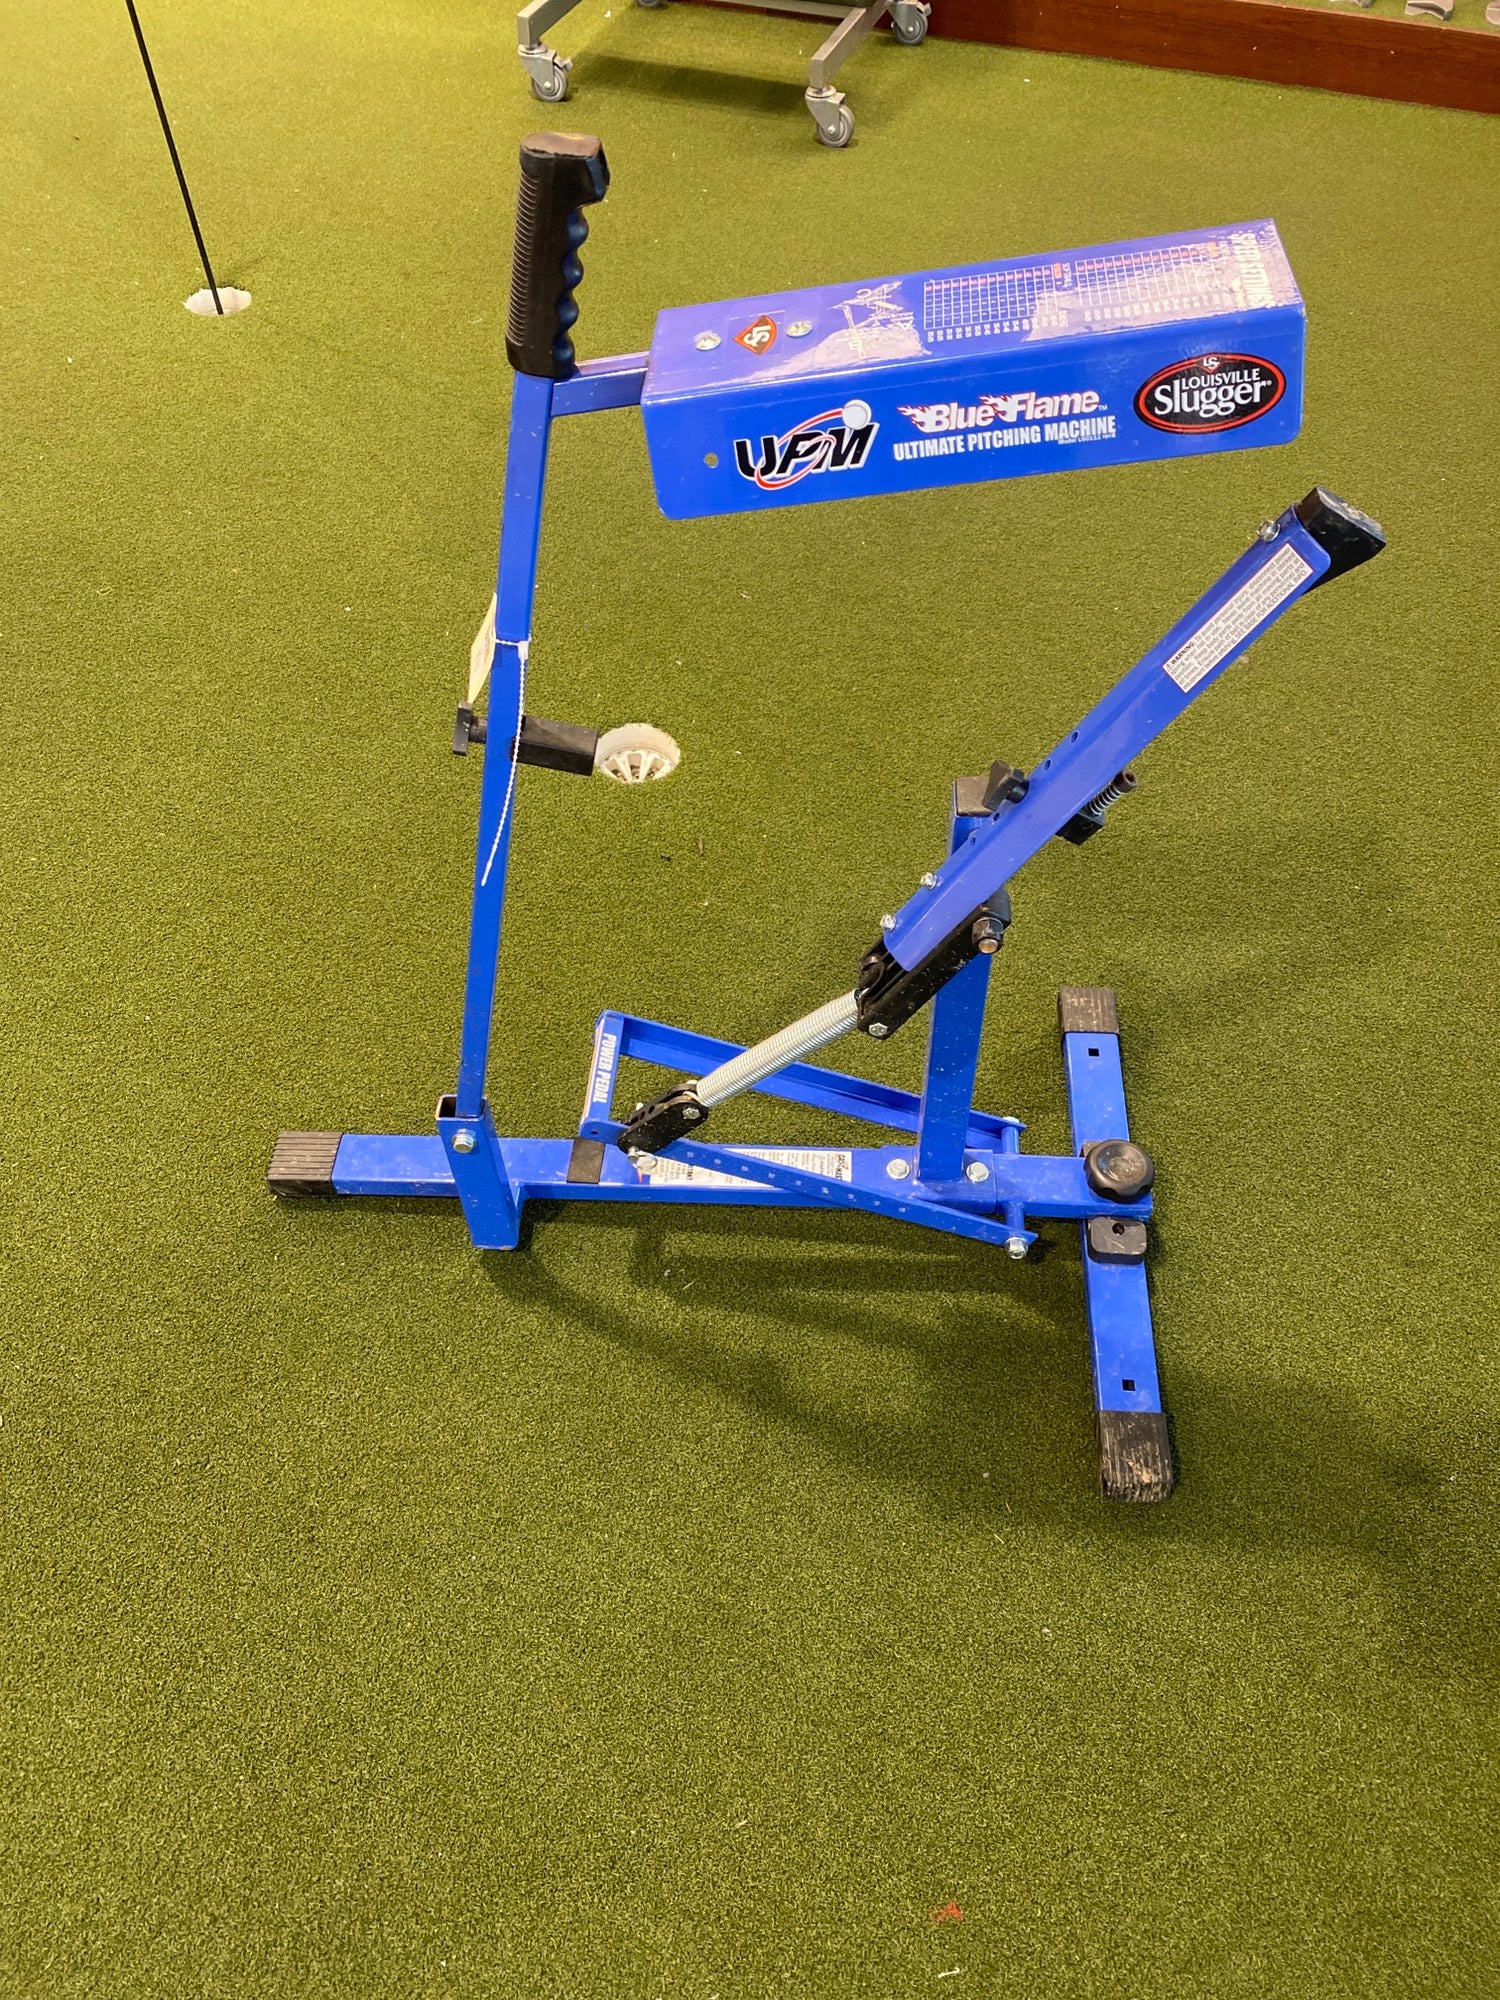 Baseball Pitching Machine - Louisville Slugger Blue Flame Ultimate Pitching  Machine for Sale in Youngtown, AZ - OfferUp